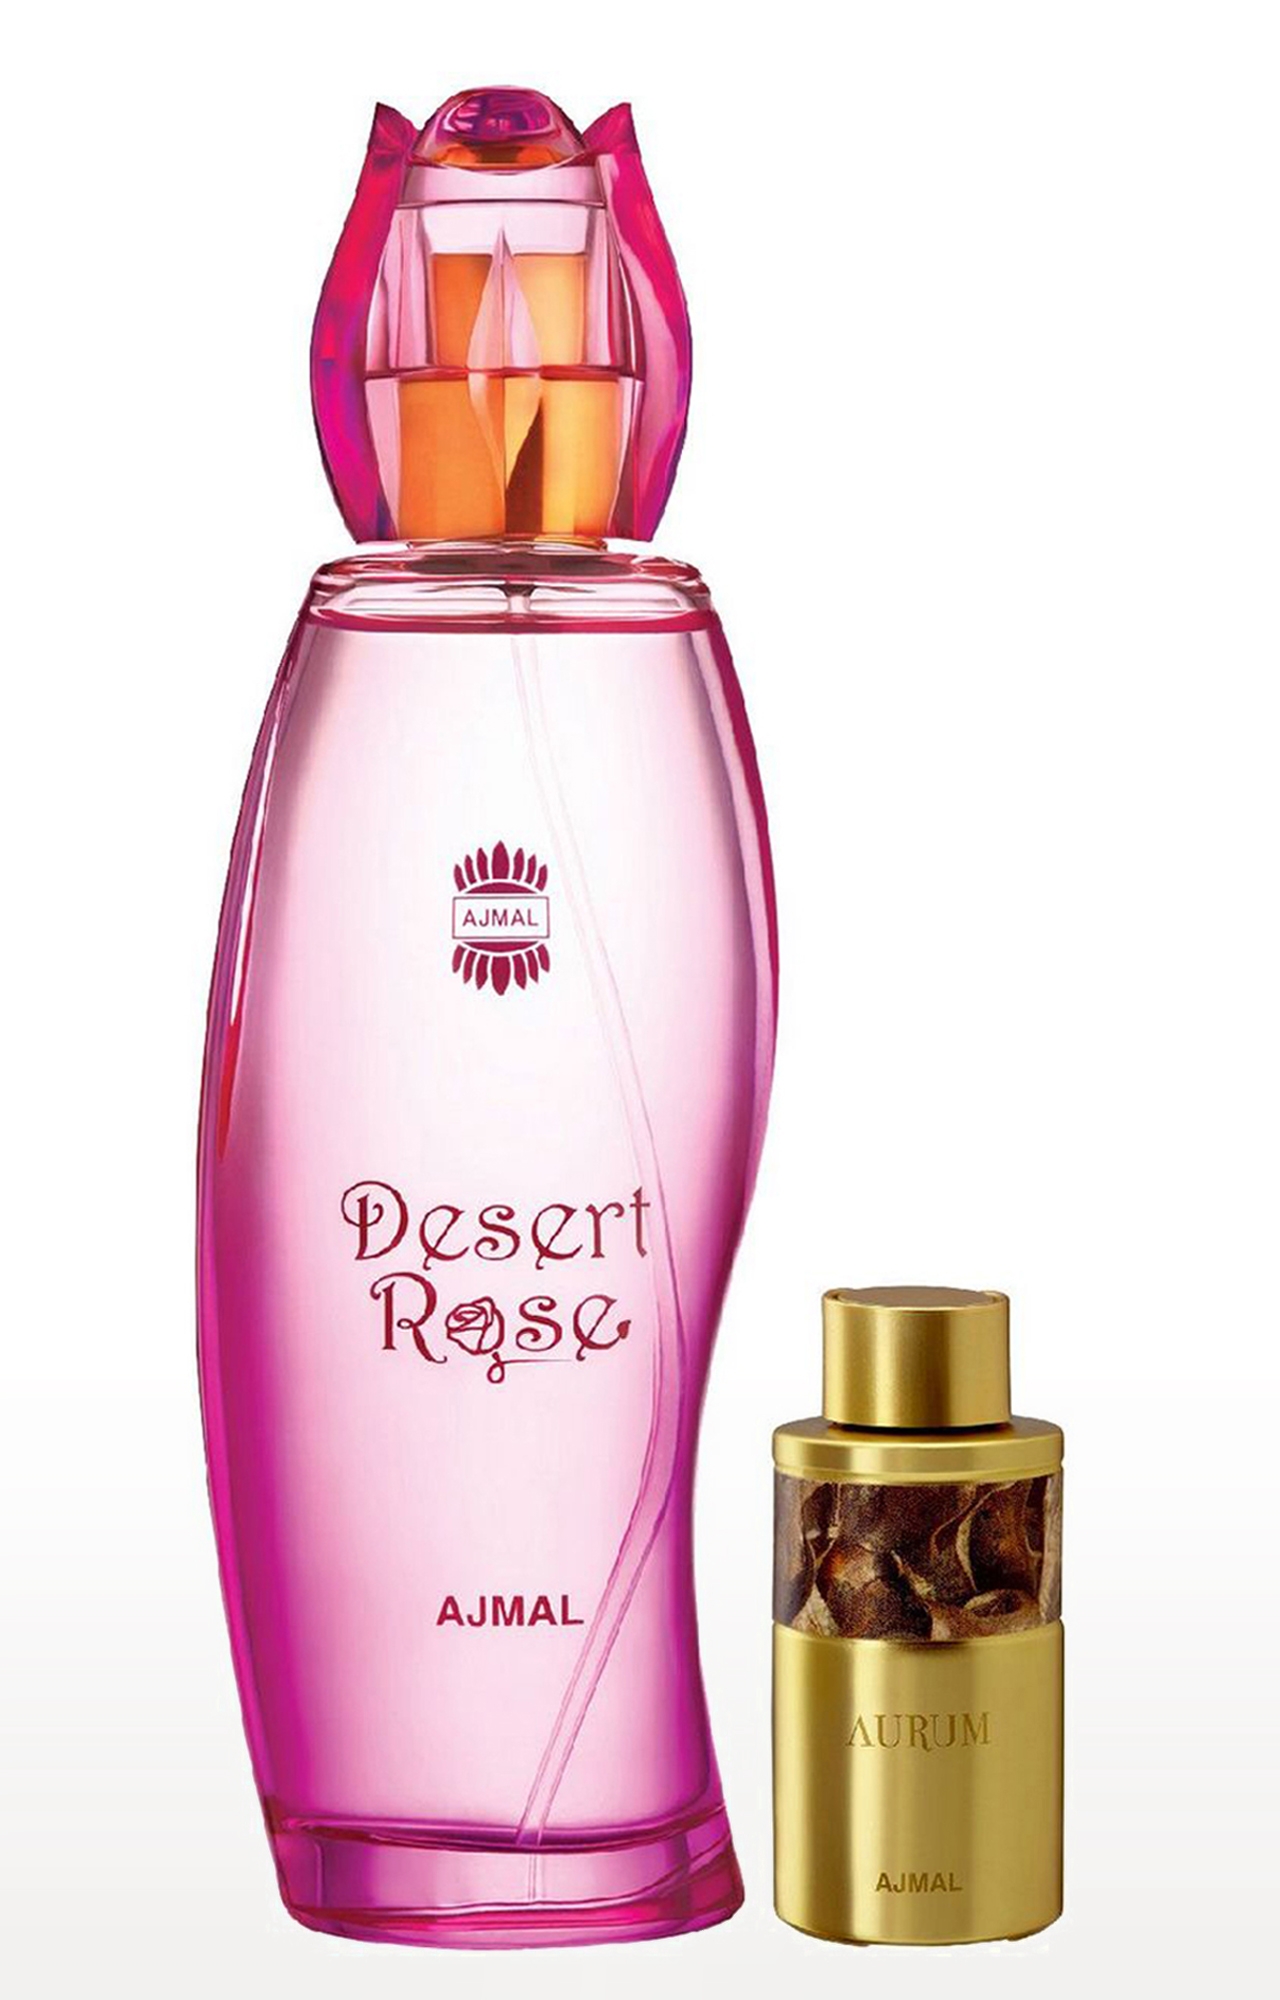 Ajmal | Ajmal Desert Rose EDP Oriental Perfume 100ml for Women and Aurum Concentrated Perfume Oil Fruity Alcohol-free Attar 10ml for Women 0